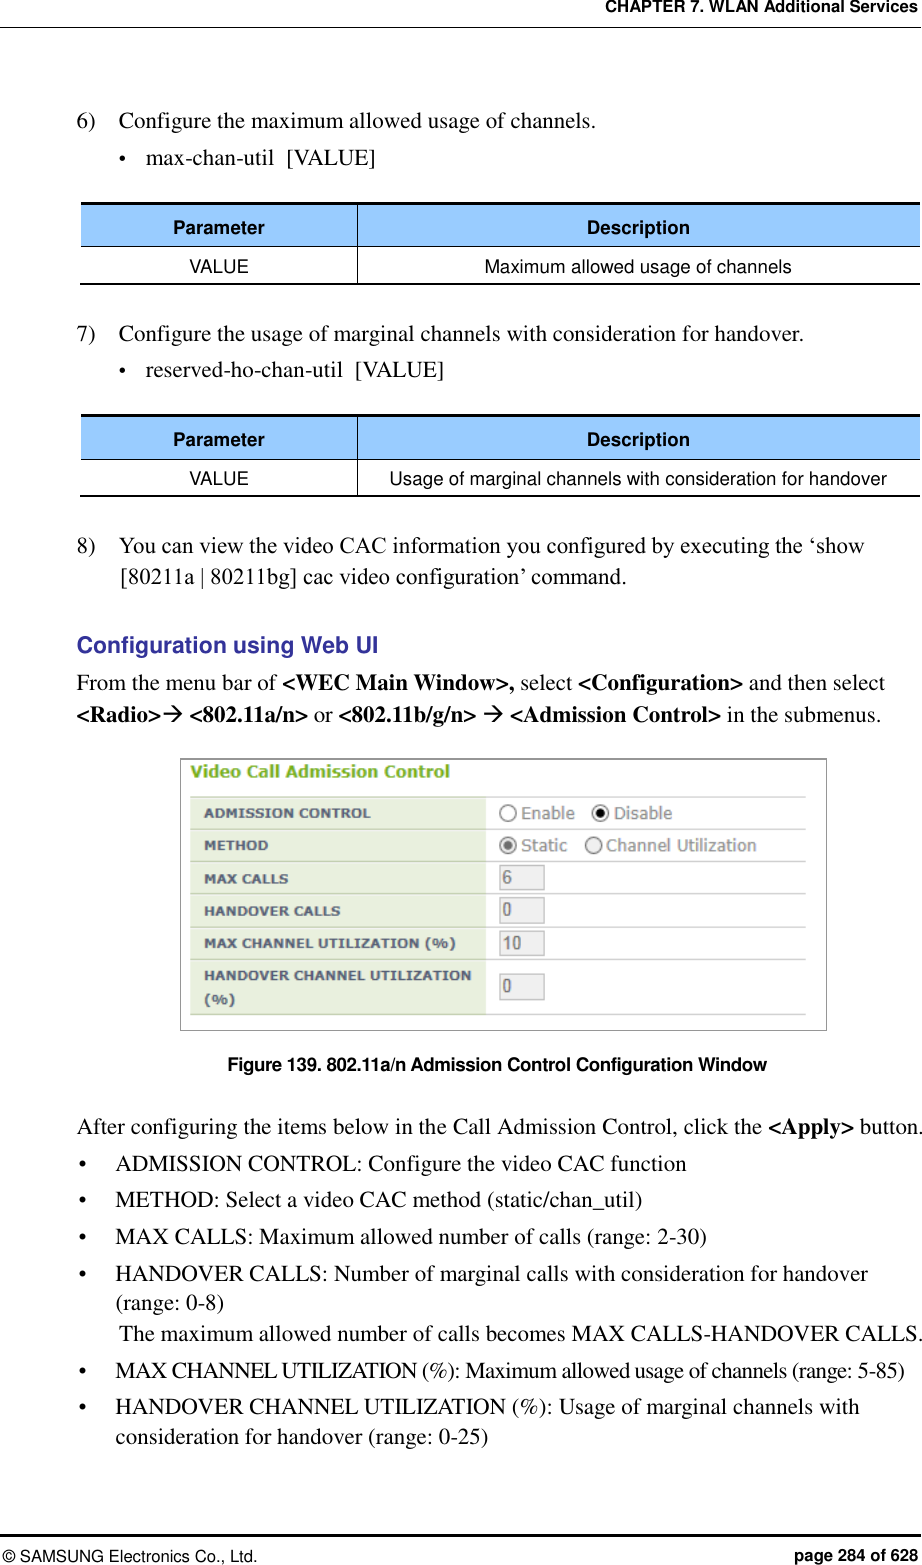 CHAPTER 7. WLAN Additional Services ©  SAMSUNG Electronics Co., Ltd.  page 284 of 628 6)    Configure the maximum allowed usage of channels.  max-chan-util  [VALUE]  Parameter Description VALUE Maximum allowed usage of channels  7)    Configure the usage of marginal channels with consideration for handover.  reserved-ho-chan-util  [VALUE]  Parameter Description VALUE Usage of marginal channels with consideration for handover  8)    You can view the video CAC information you configured by executing the ‘show [80211a | 80211bg] cac video configuration’ command.  Configuration using Web UI From the menu bar of &lt;WEC Main Window&gt;, select &lt;Configuration&gt; and then select &lt;Radio&gt; &lt;802.11a/n&gt; or &lt;802.11b/g/n&gt;  &lt;Admission Control&gt; in the submenus.  Figure 139. 802.11a/n Admission Control Configuration Window  After configuring the items below in the Call Admission Control, click the &lt;Apply&gt; button.  ADMISSION CONTROL: Configure the video CAC function  METHOD: Select a video CAC method (static/chan_util)  MAX CALLS: Maximum allowed number of calls (range: 2-30)  HANDOVER CALLS: Number of marginal calls with consideration for handover (range: 0-8) The maximum allowed number of calls becomes MAX CALLS-HANDOVER CALLS.  MAX CHANNEL UTILIZATION (%): Maximum allowed usage of channels (range: 5-85)  HANDOVER CHANNEL UTILIZATION (%): Usage of marginal channels with consideration for handover (range: 0-25) 